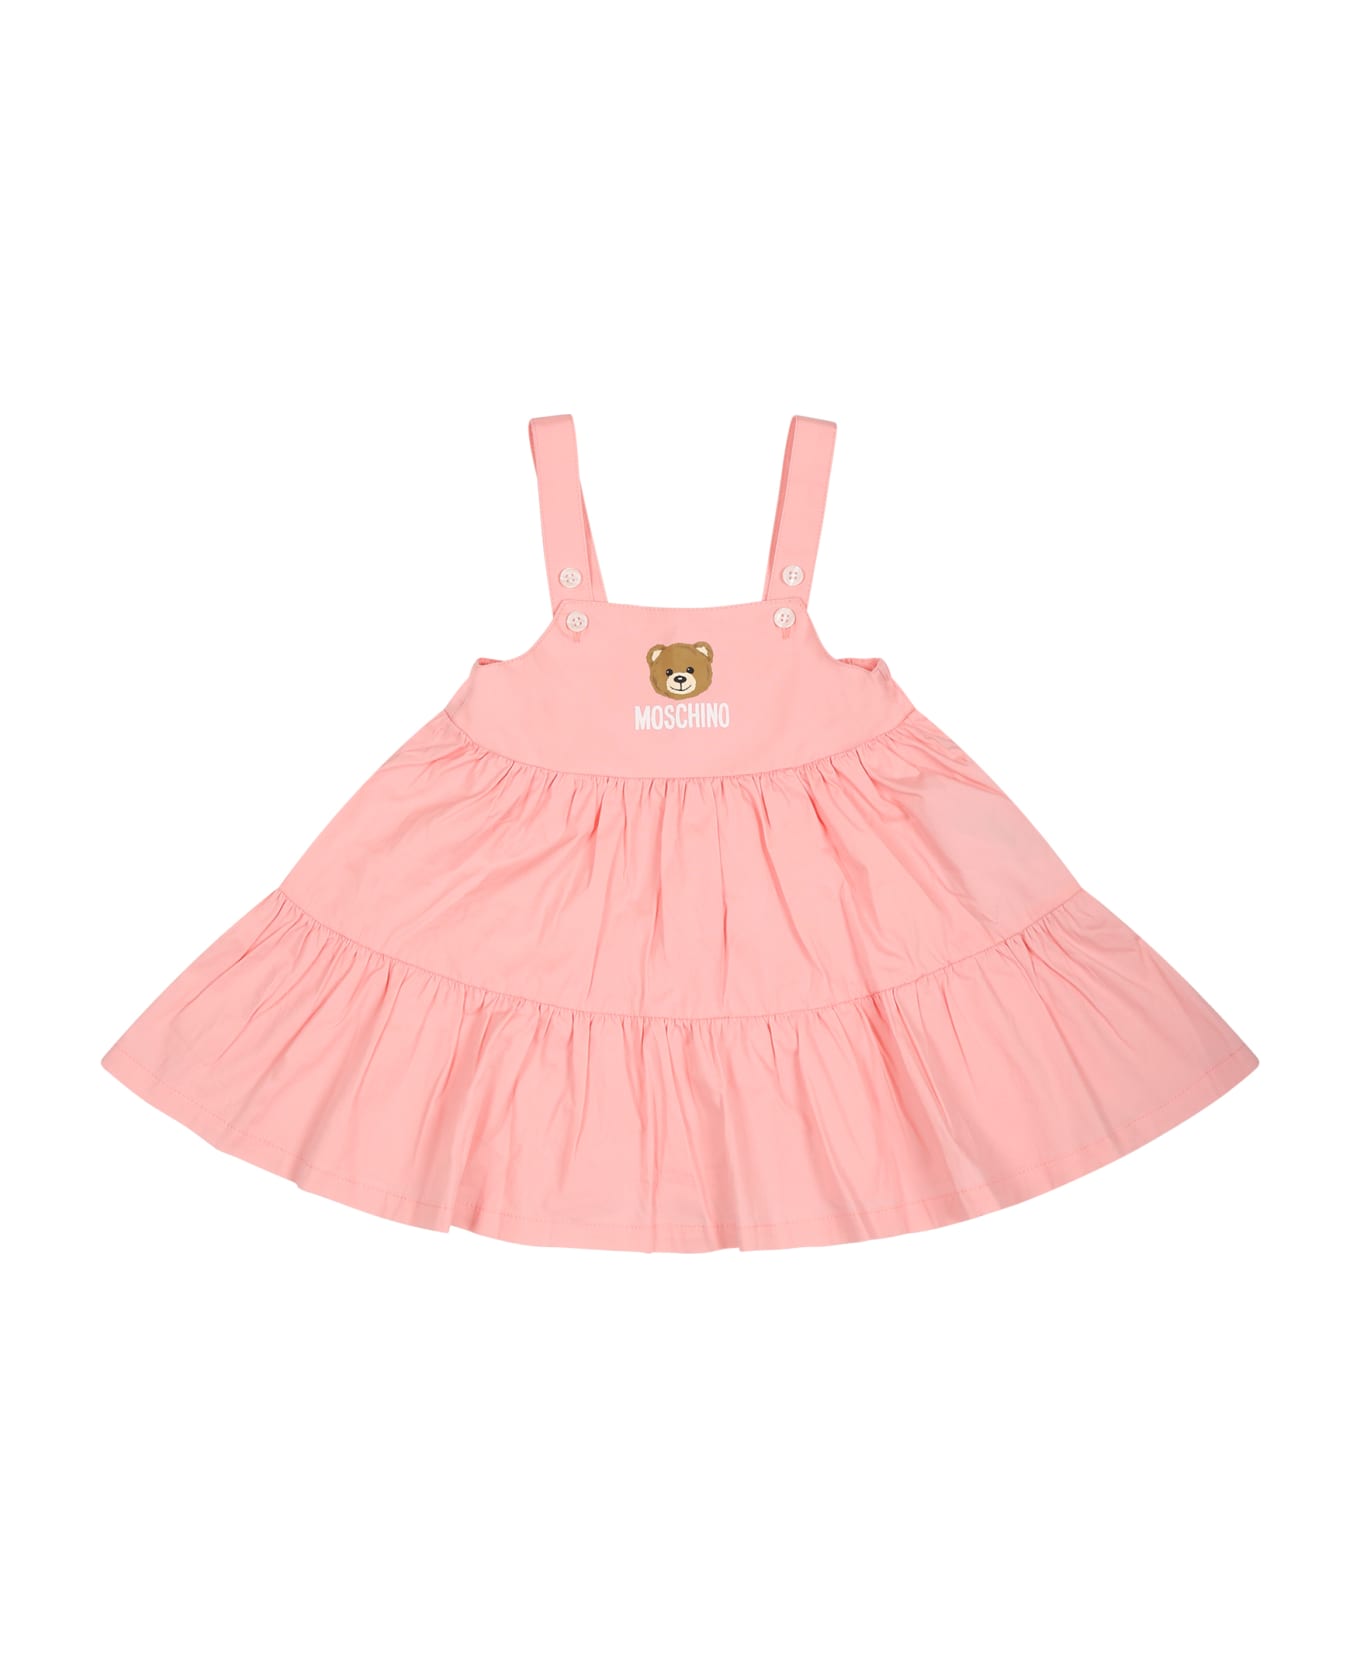 Moschino Multicolor Suit For Baby Girl With Teddy Bear And Logo - Pink